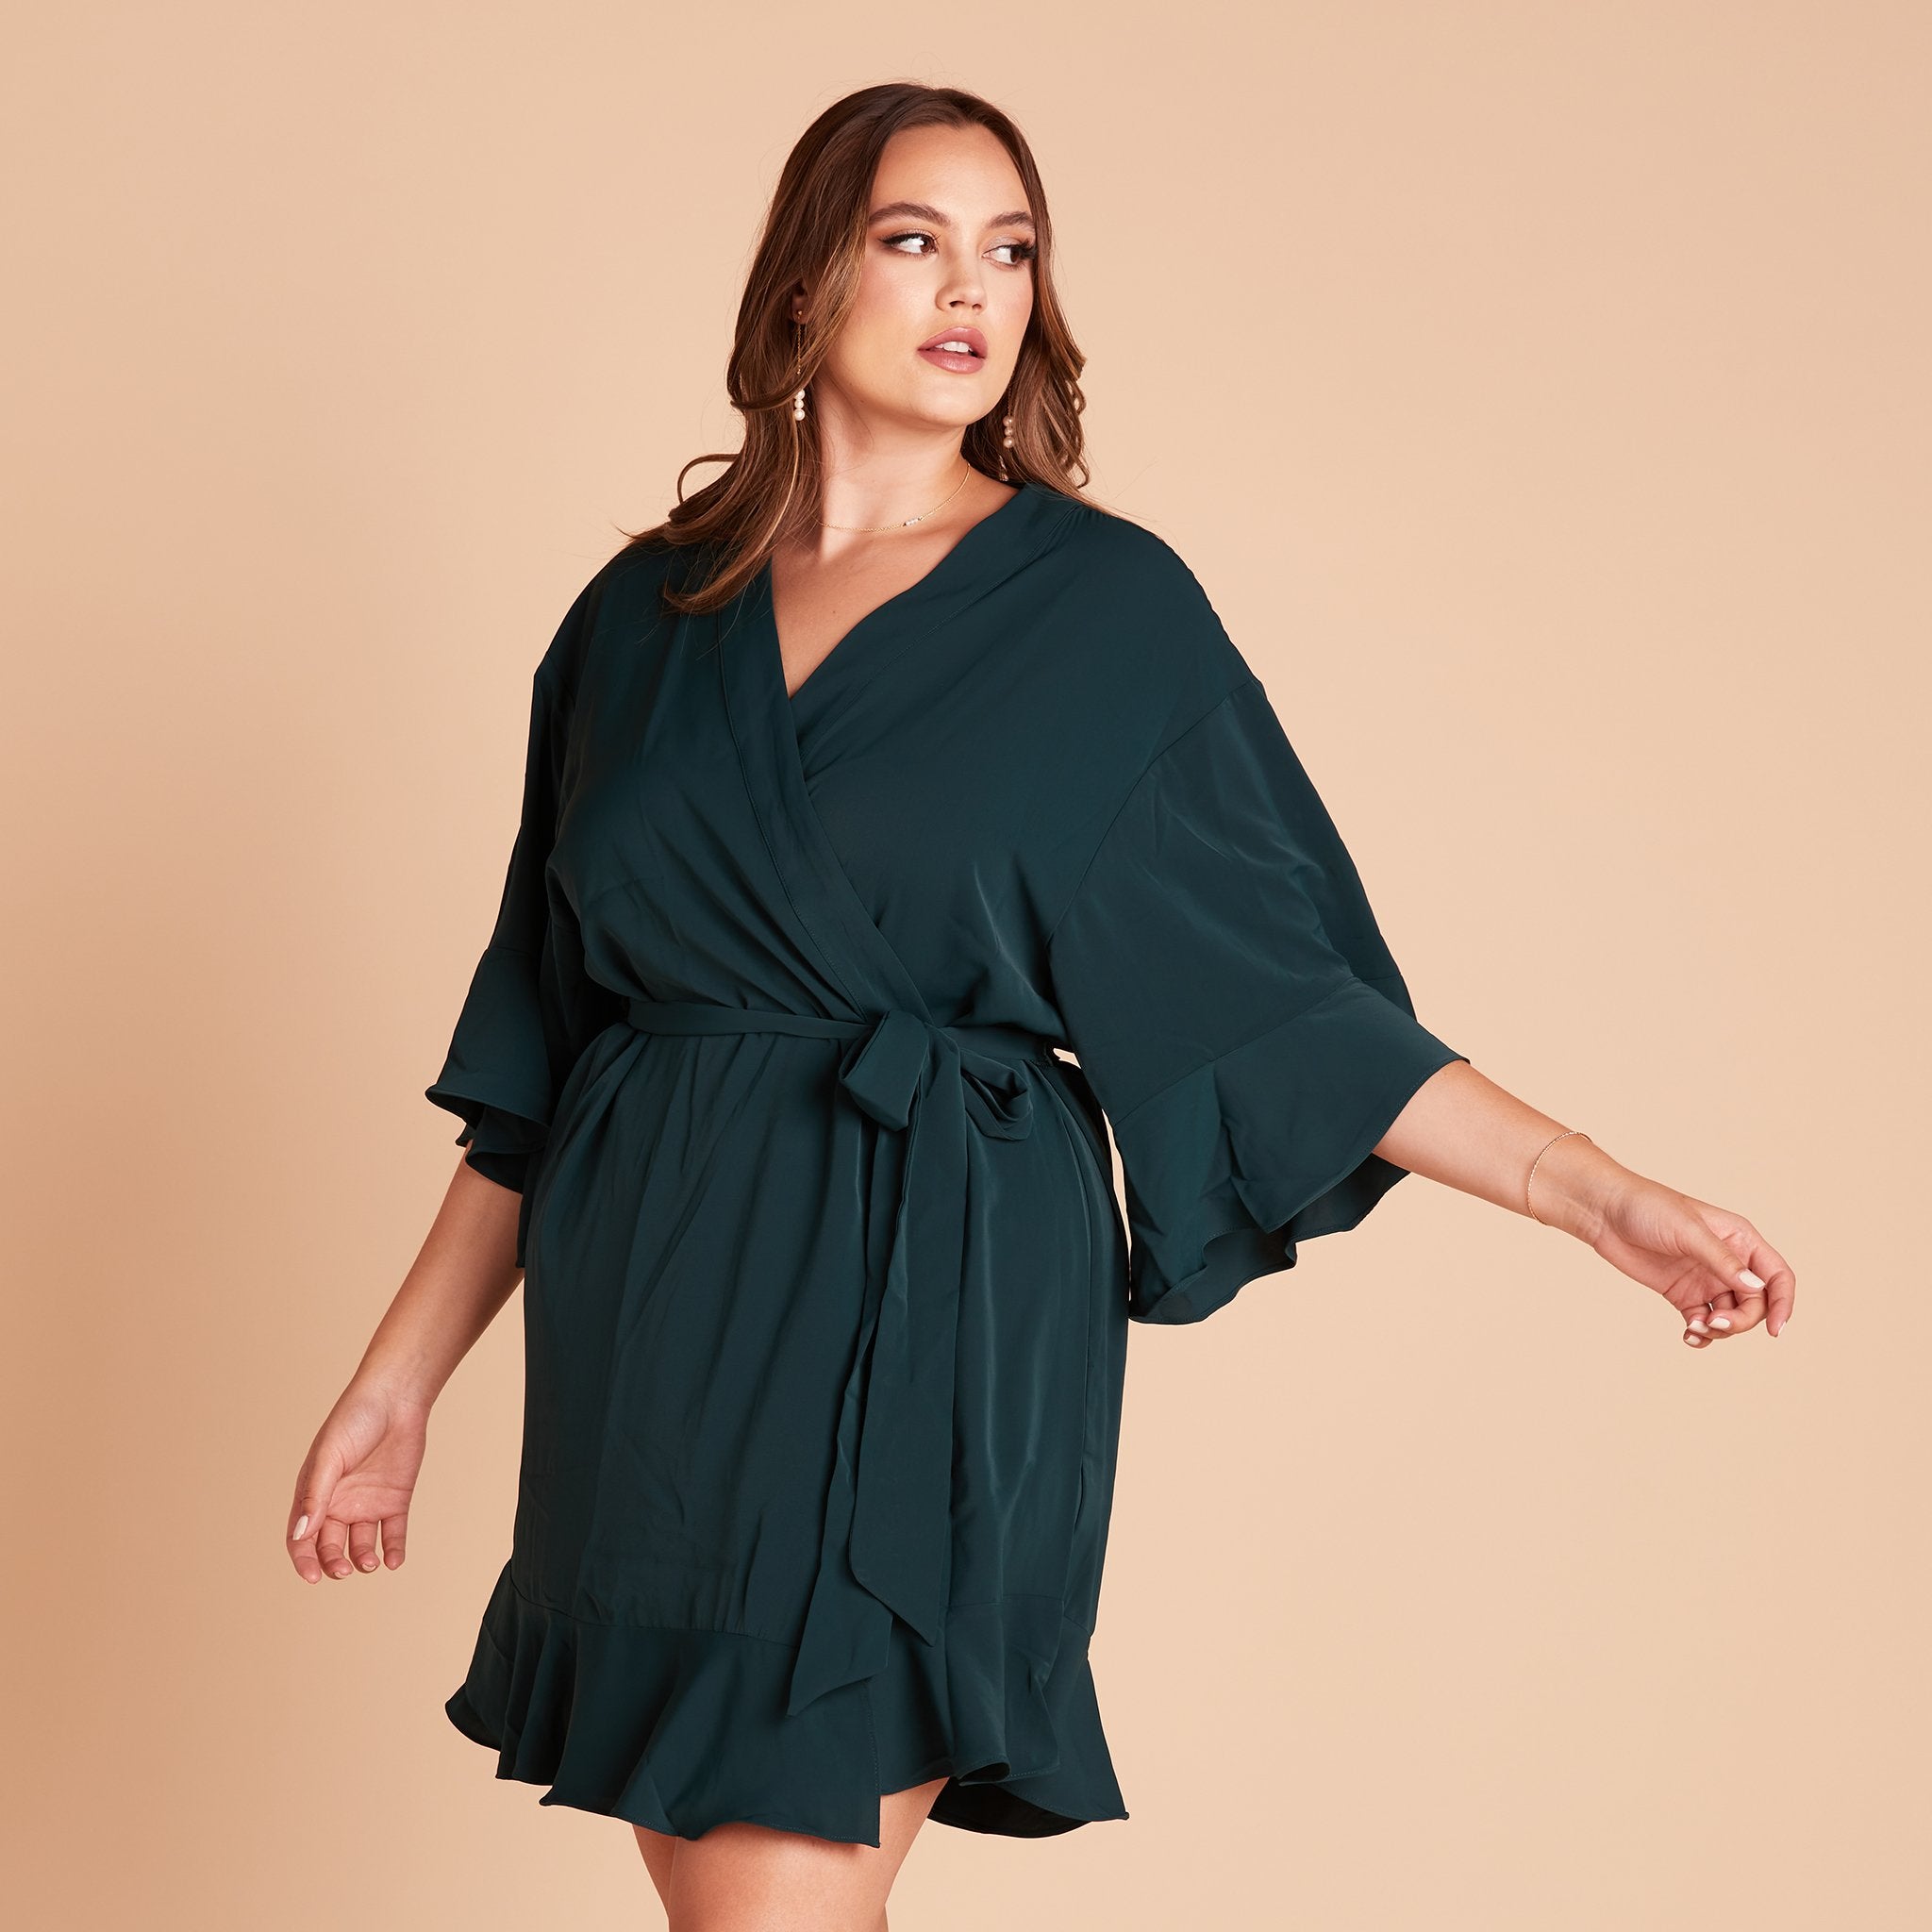 Kenny Ruffle Robe in emerald green by Birdy Grey, front view